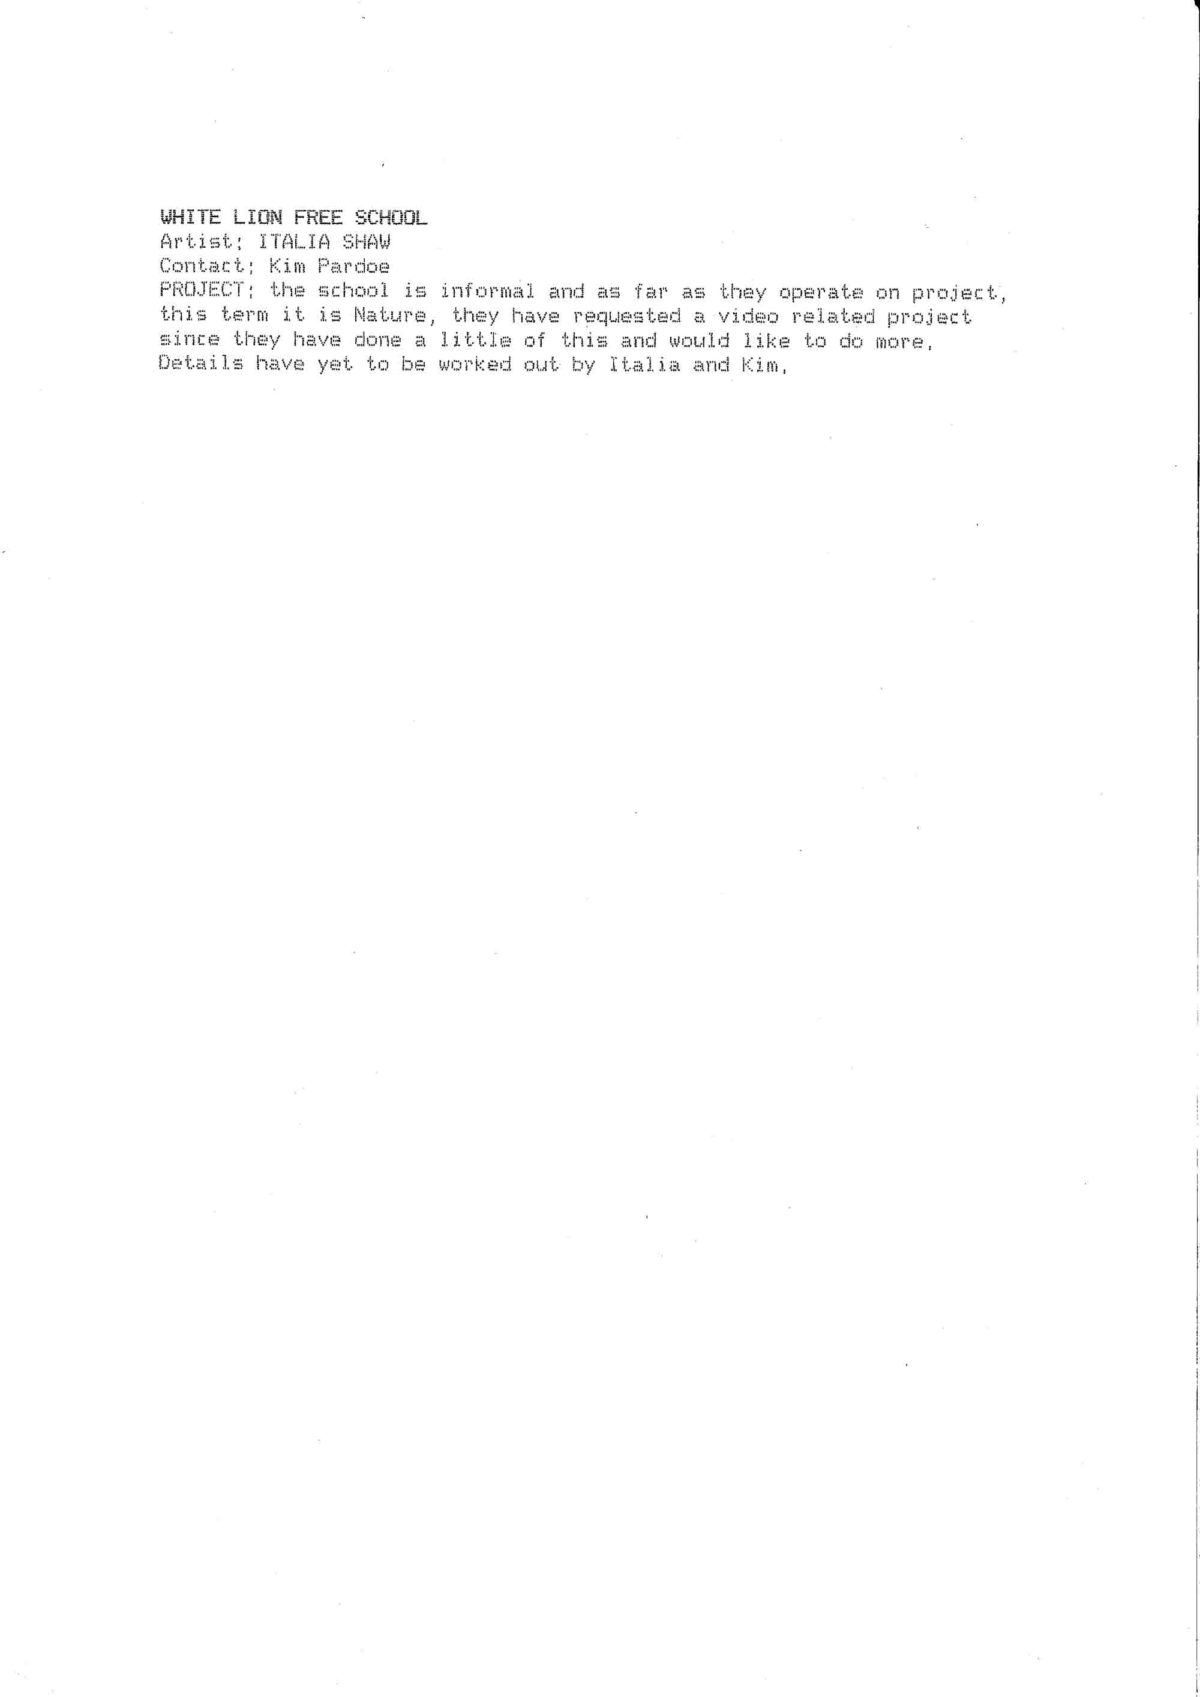 Live Art in Education programme, 1988 (Page 5 of 5)